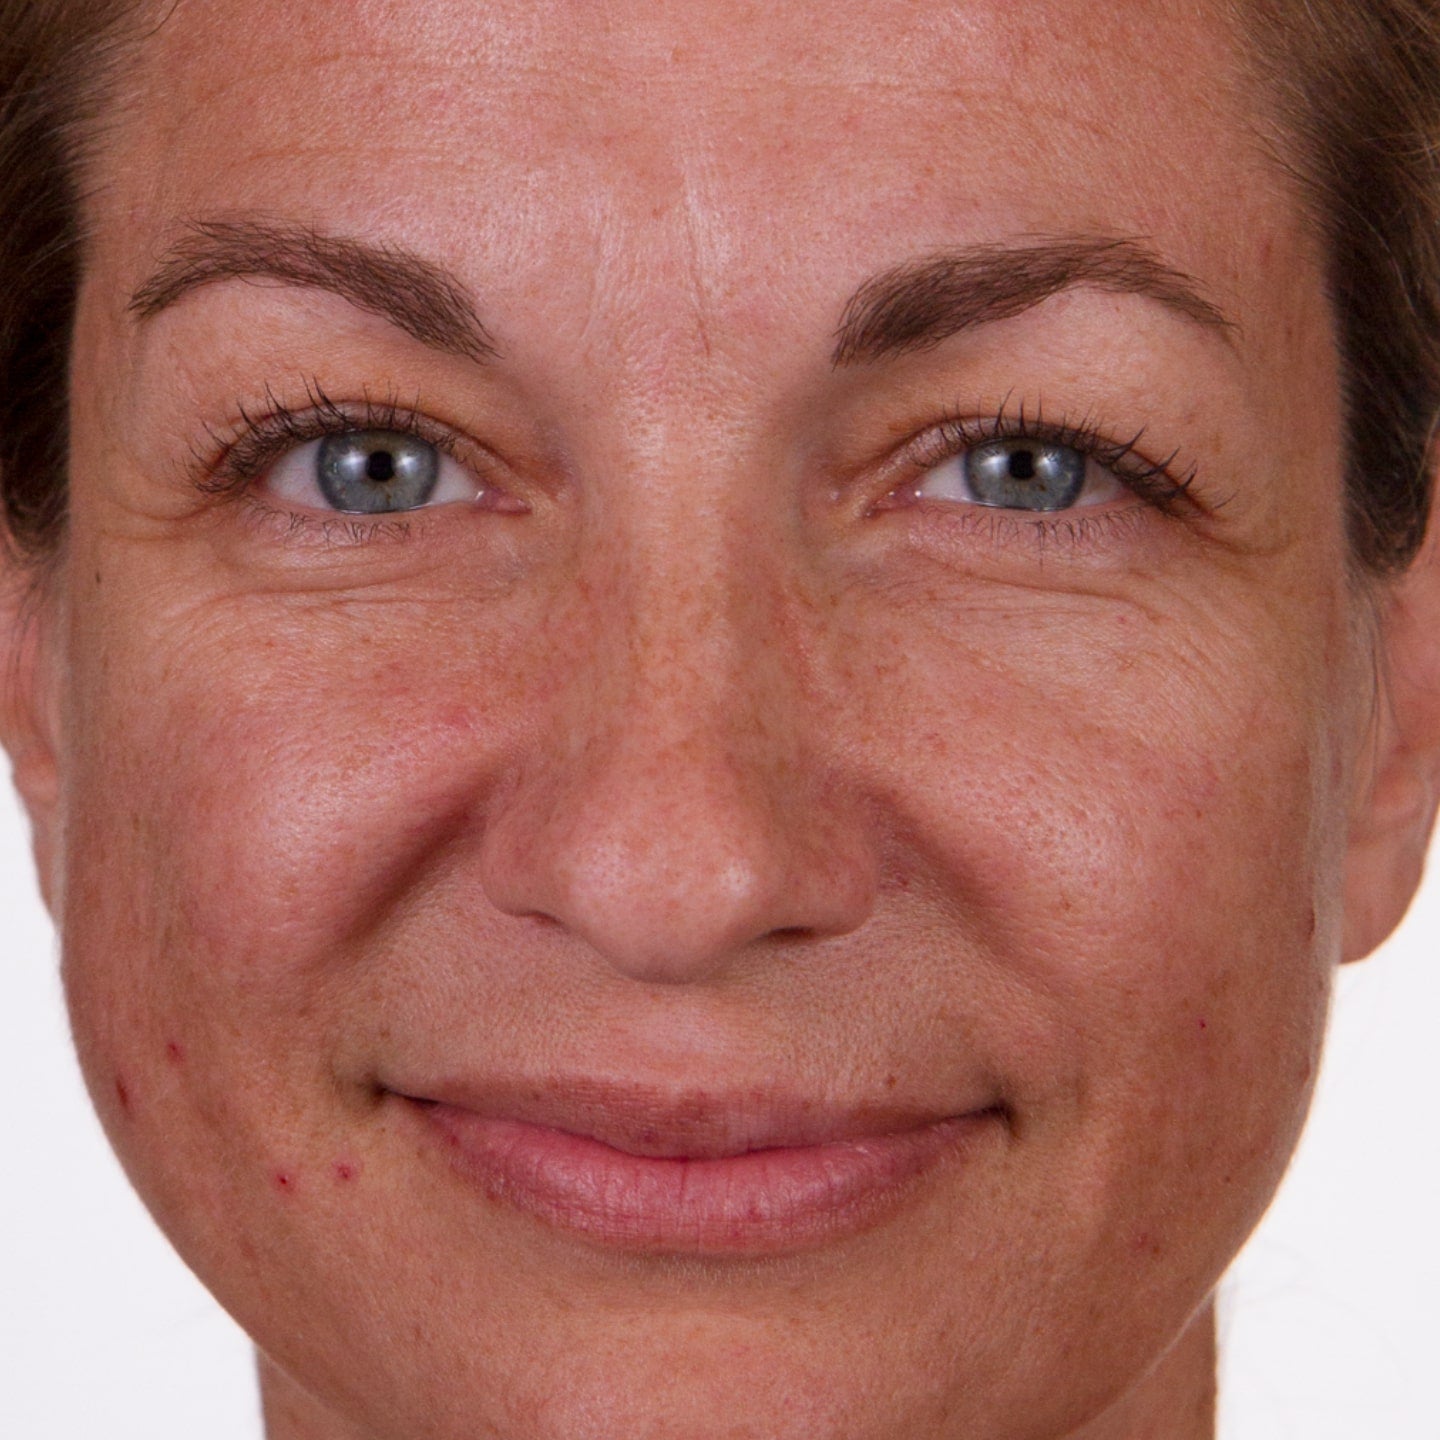 Close up photo of a woman's face as she softly smiles